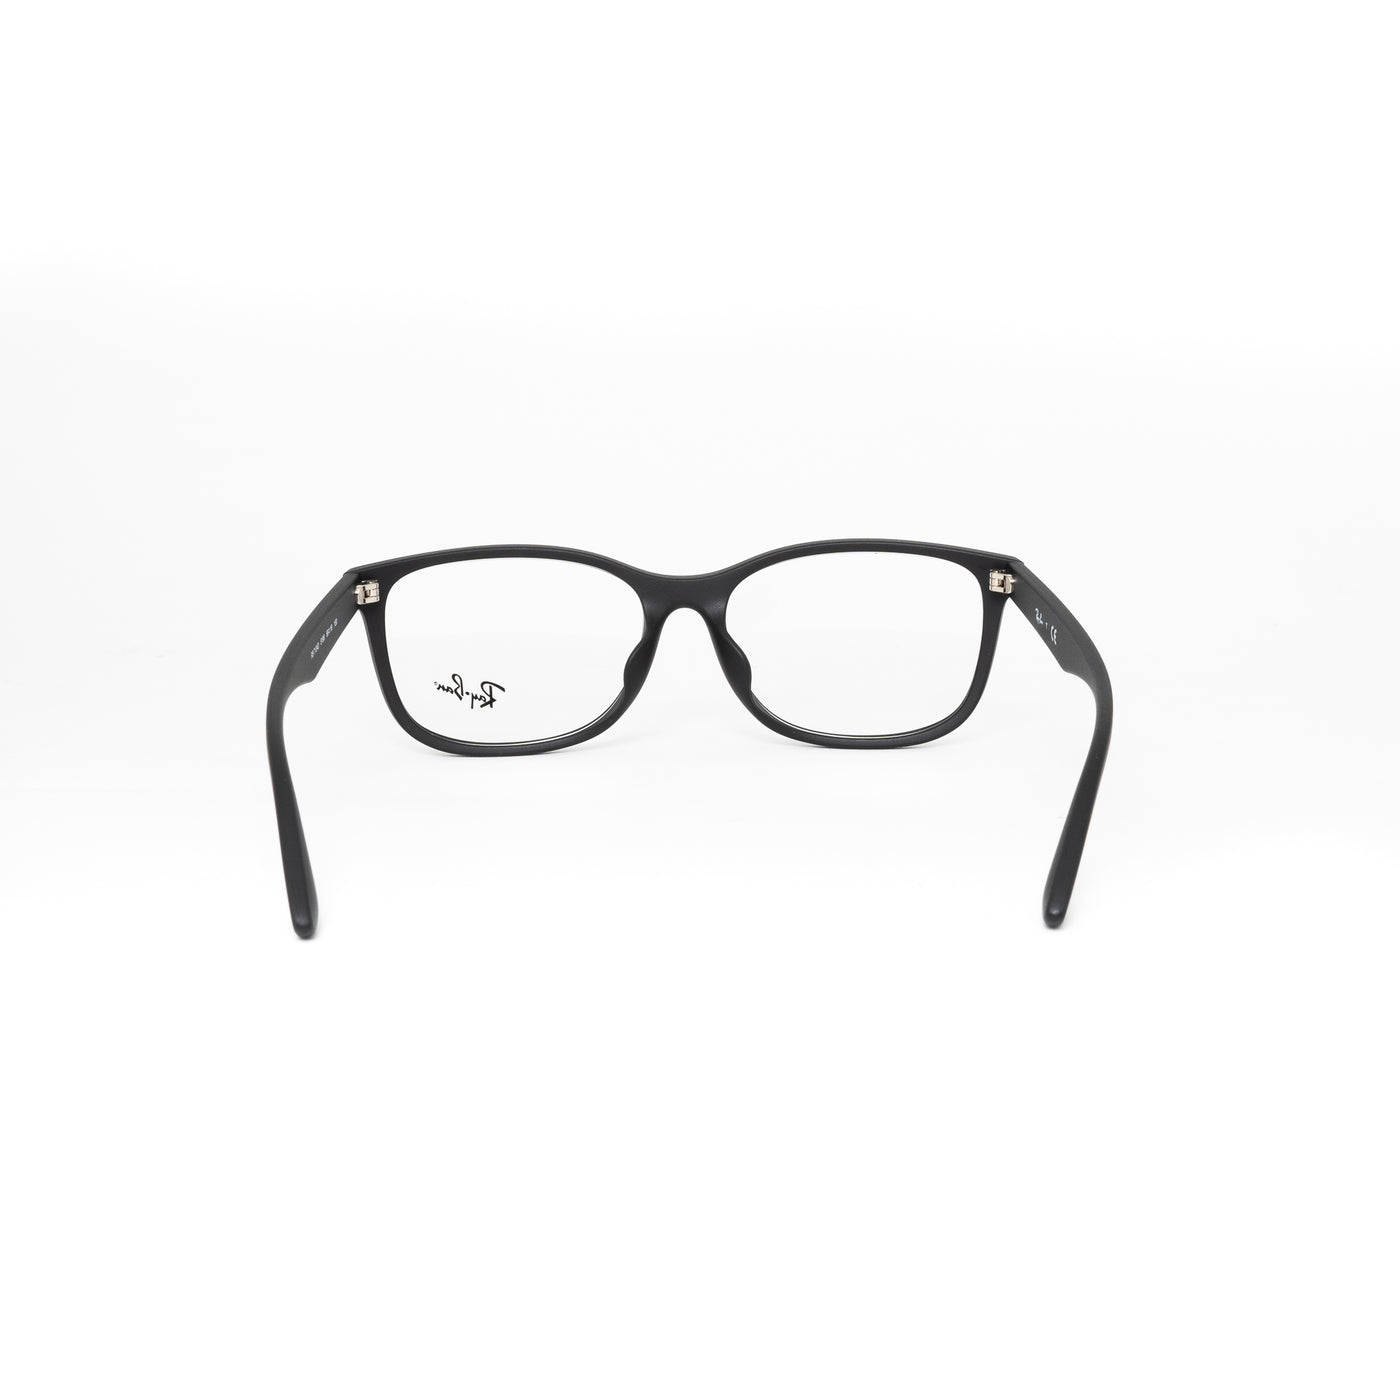 Ray-Ban RB7124D/5196_56 | Eyeglasses - Vision Express Optical Philippines